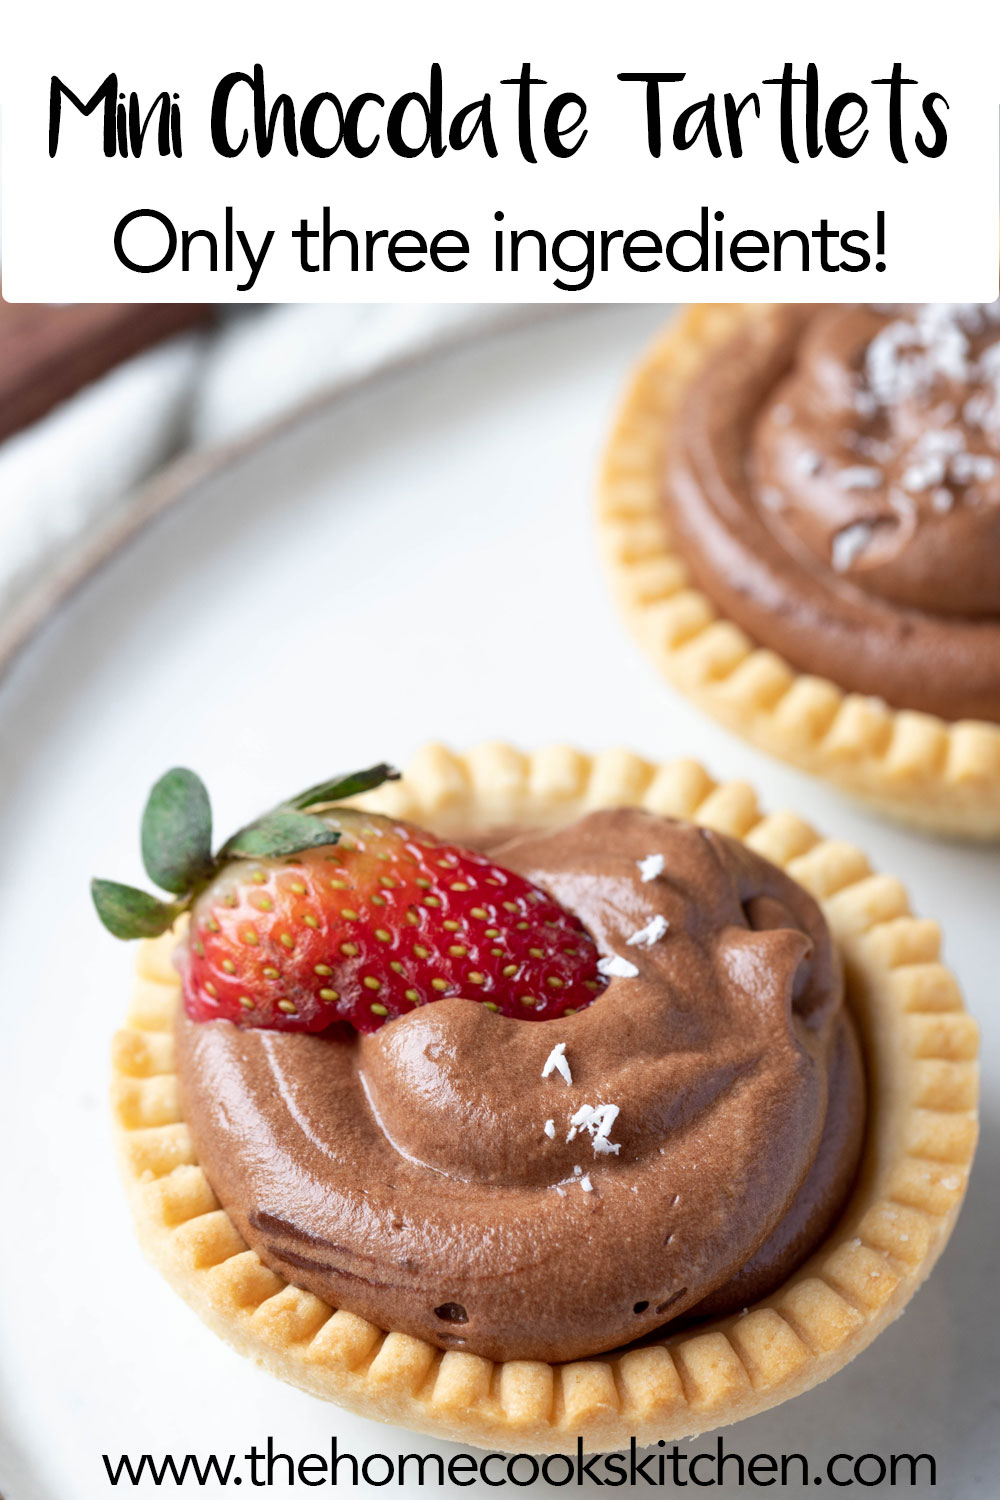 Chocolate Tartlets - The Home Cook's Kitchen